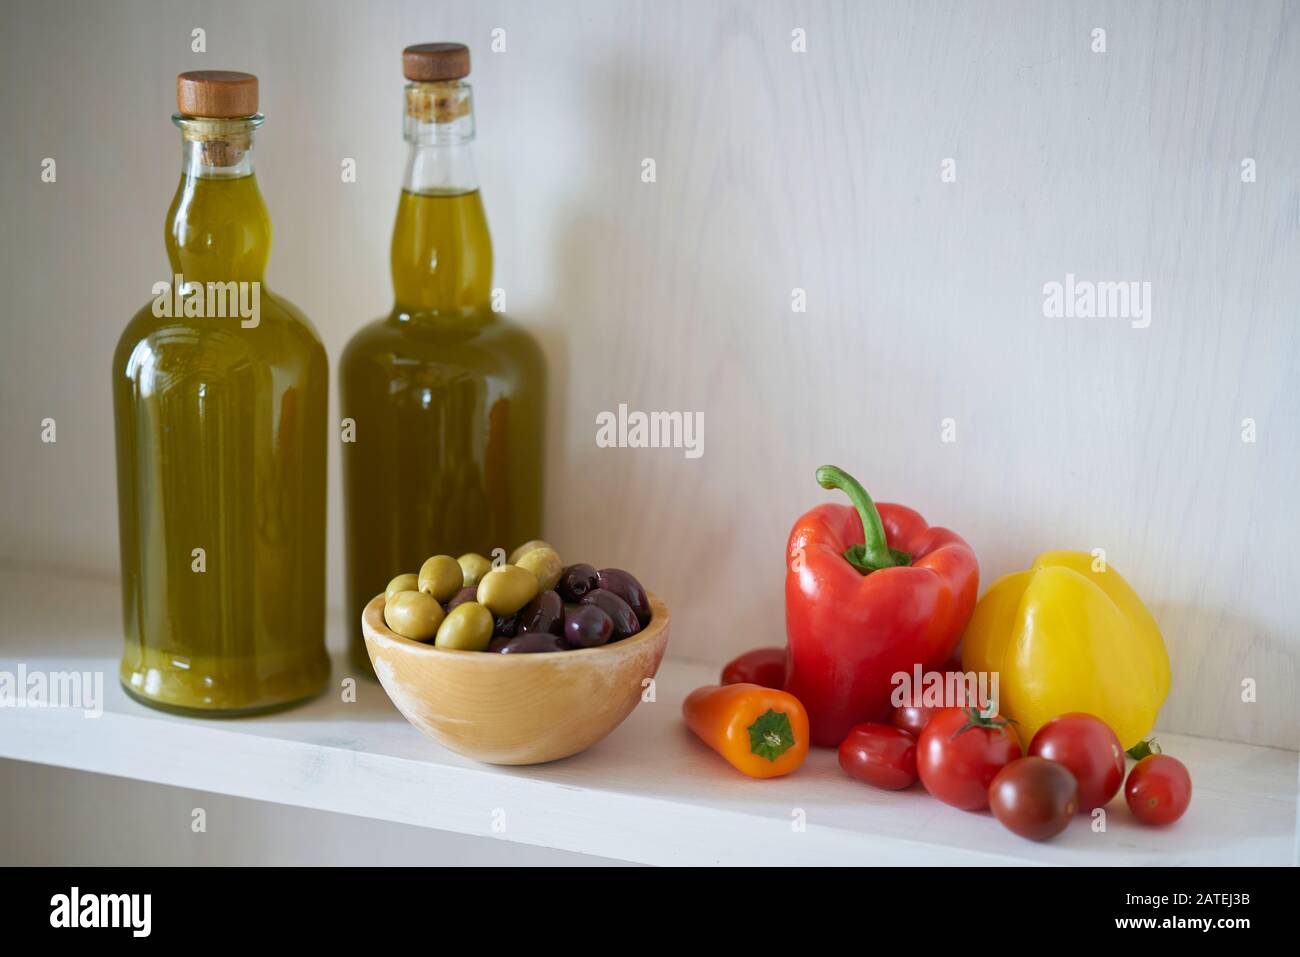 two wonderful bottles of cooking oil or olive oil on a wall shelf, wooden bowl with olives green and black next to vegan vegetarian vegetables Stock Photo